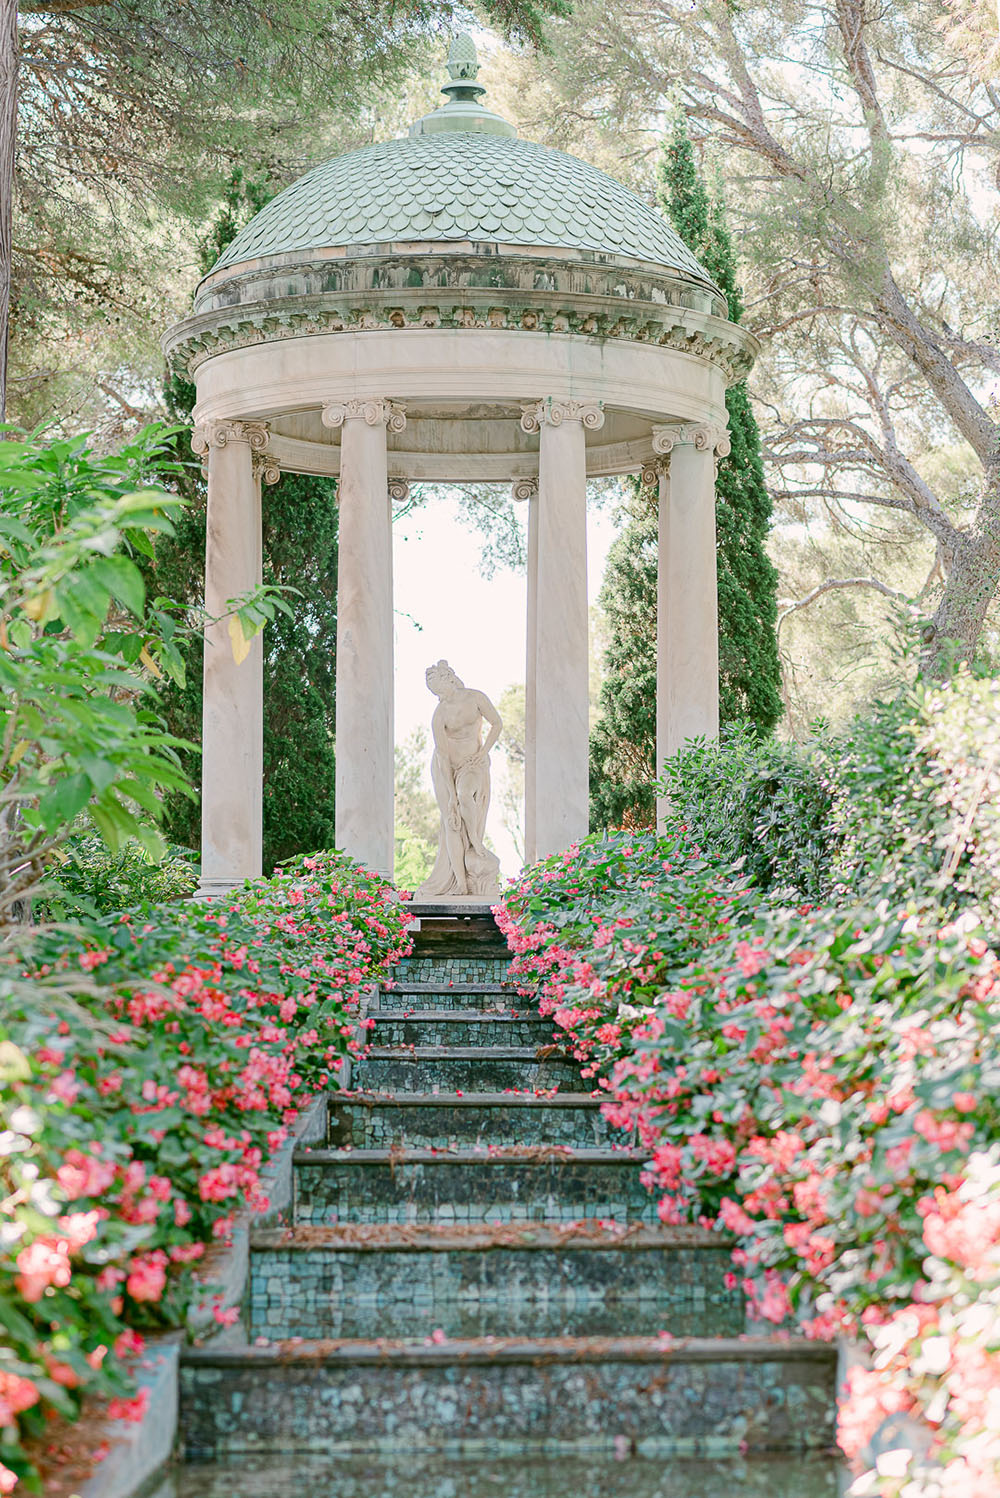 The gardens of Villa Ephrussi de Rothschild with a marble sculpture in a columned pavilion